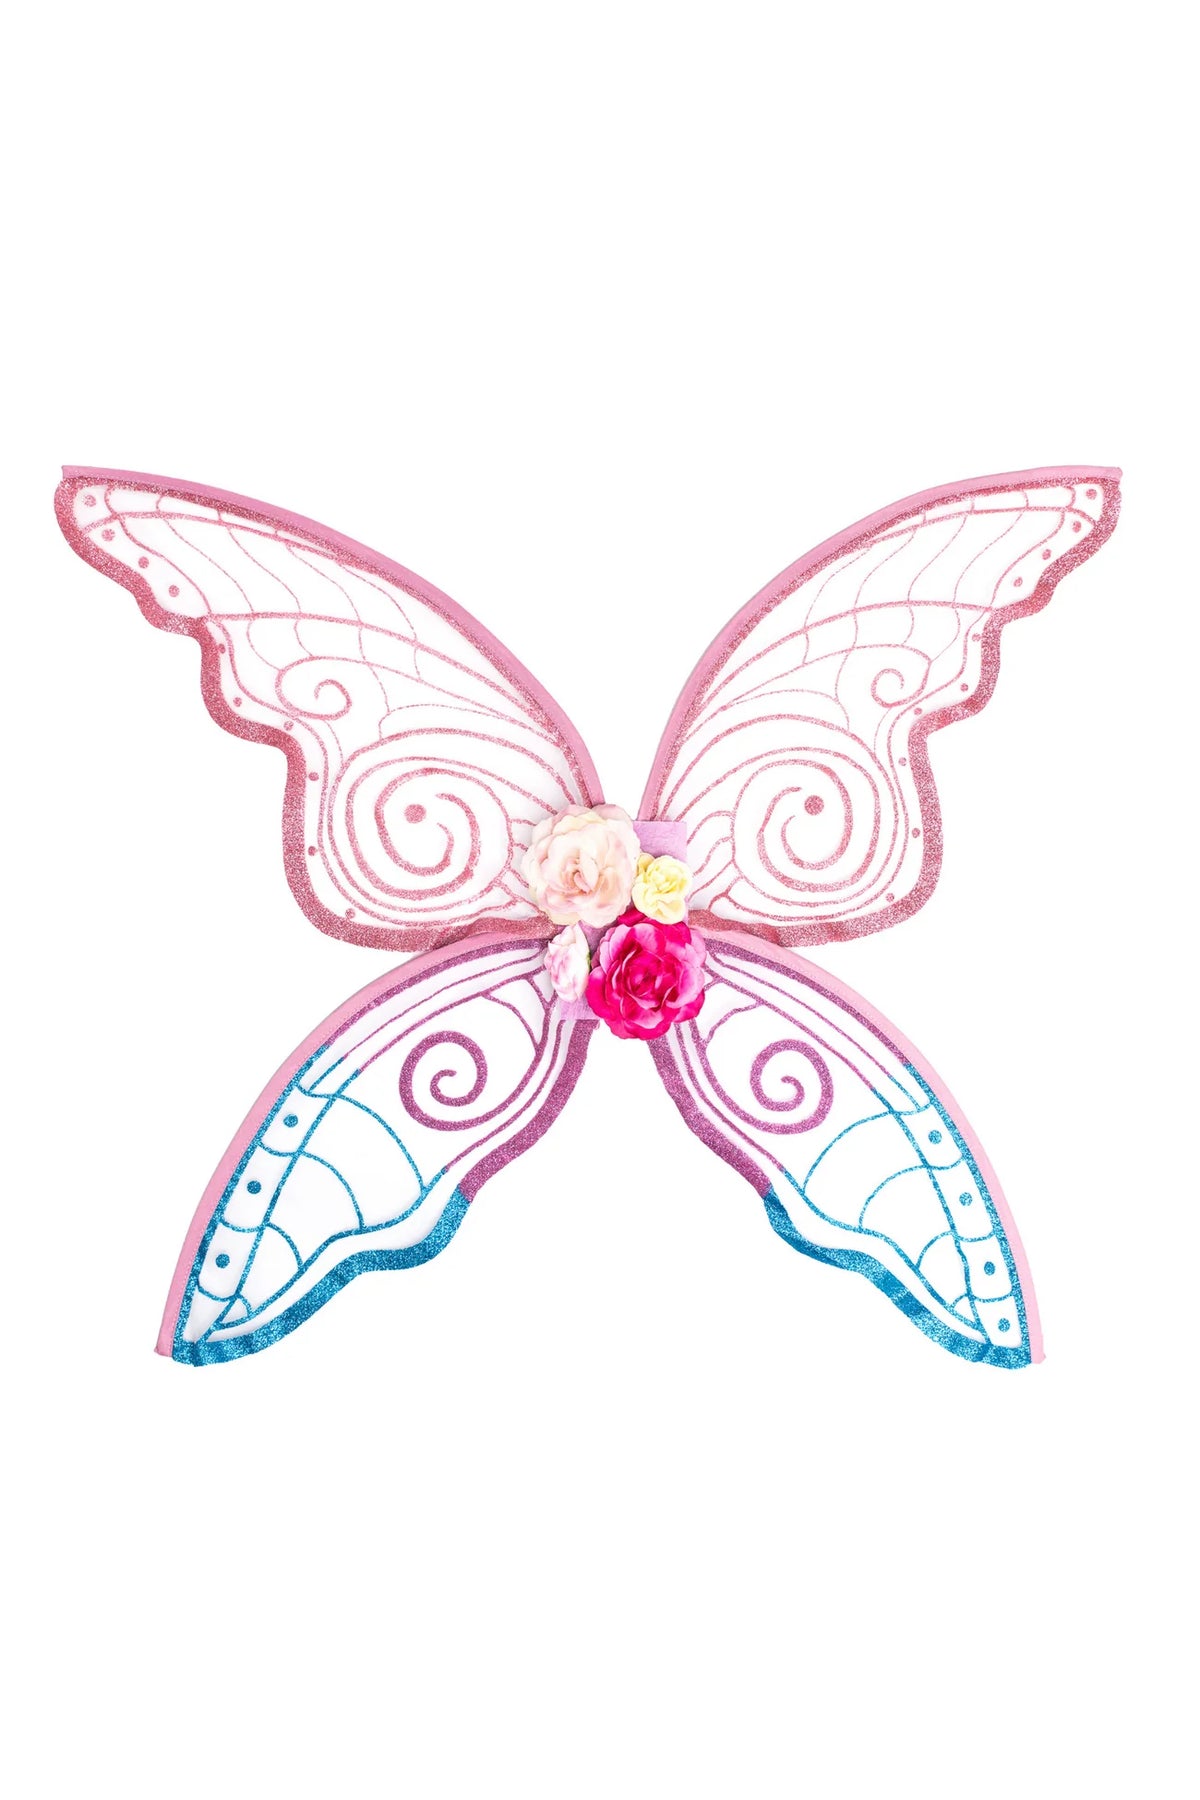 Pink & Blue Fairy Blossom Wings Cover